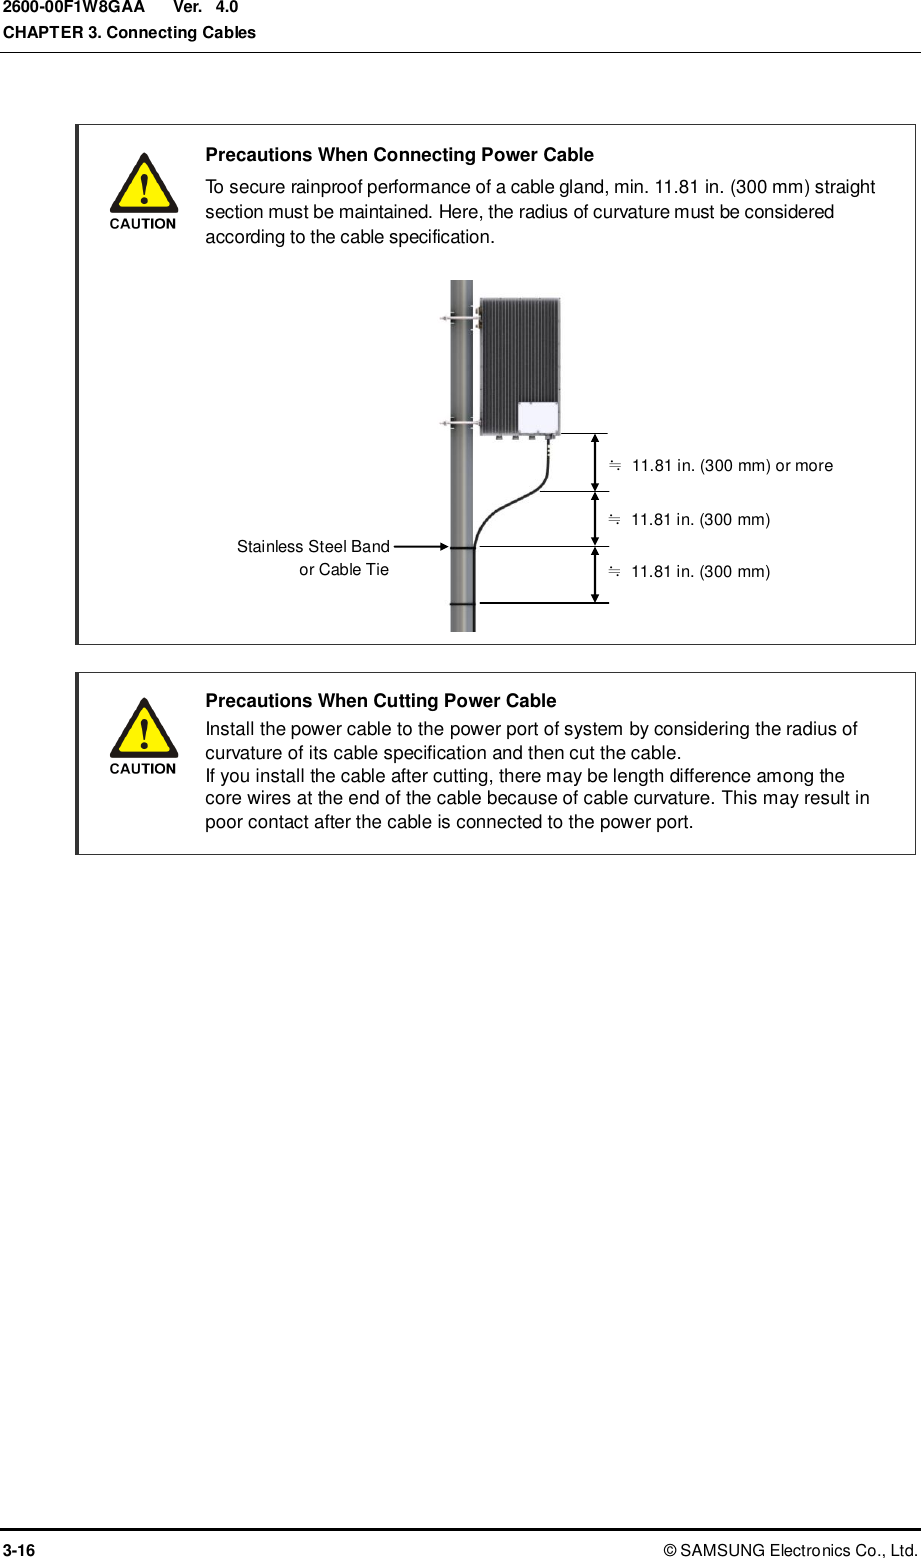  Ver.  CHAPTER 3. Connecting Cables 3-16 ©  SAMSUNG Electronics Co., Ltd. 2600-00F1W8GAA 4.0   Precautions When Connecting Power Cable   To secure rainproof performance of a cable gland, min. 11.81 in. (300 mm) straight section must be maintained. Here, the radius of curvature must be considered according to the cable specification.               Precautions When Cutting Power Cable   Install the power cable to the power port of system by considering the radius of curvature of its cable specification and then cut the cable. If you install the cable after cutting, there may be length difference among the core wires at the end of the cable because of cable curvature. This may result in poor contact after the cable is connected to the power port.  Stainless Steel Band   or Cable Tie ≒  11.81 in. (300 mm) or more ≒  11.81 in. (300 mm) ≒  11.81 in. (300 mm) 